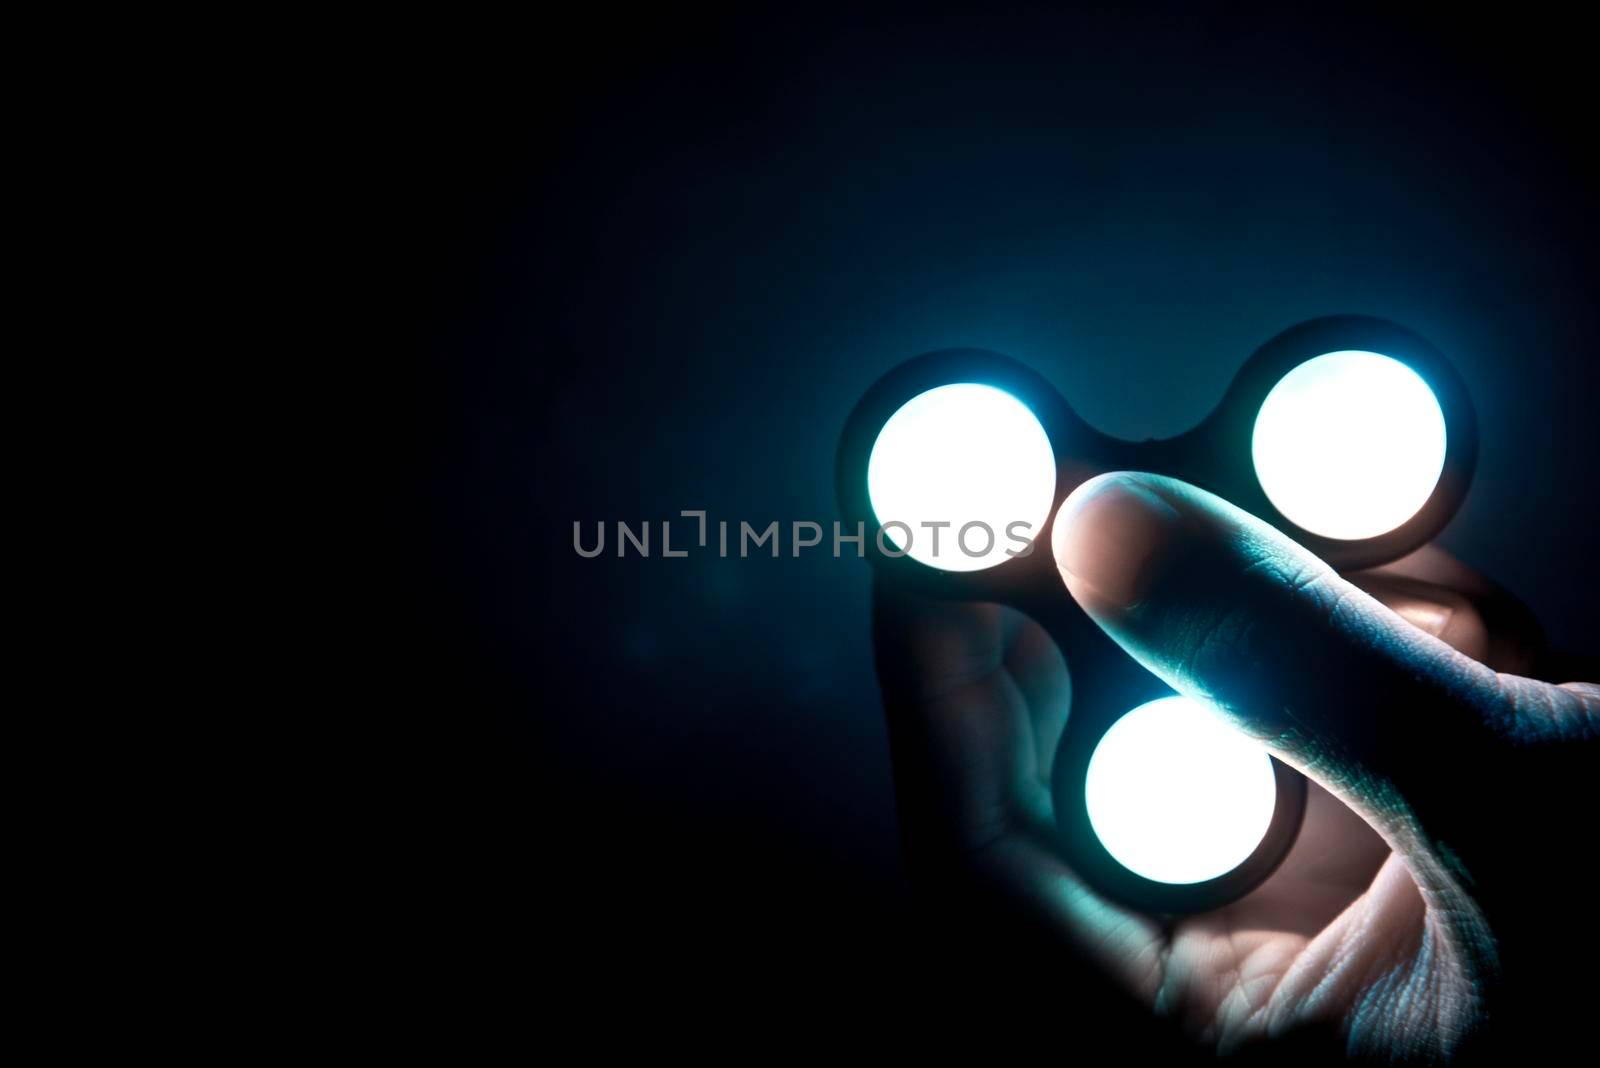 Fidget spinner toy with neon light consist of ball-bearing made from metal or plastic helping people who have trouble with focusing by relieving nervous energy or psychological stress. selective focus